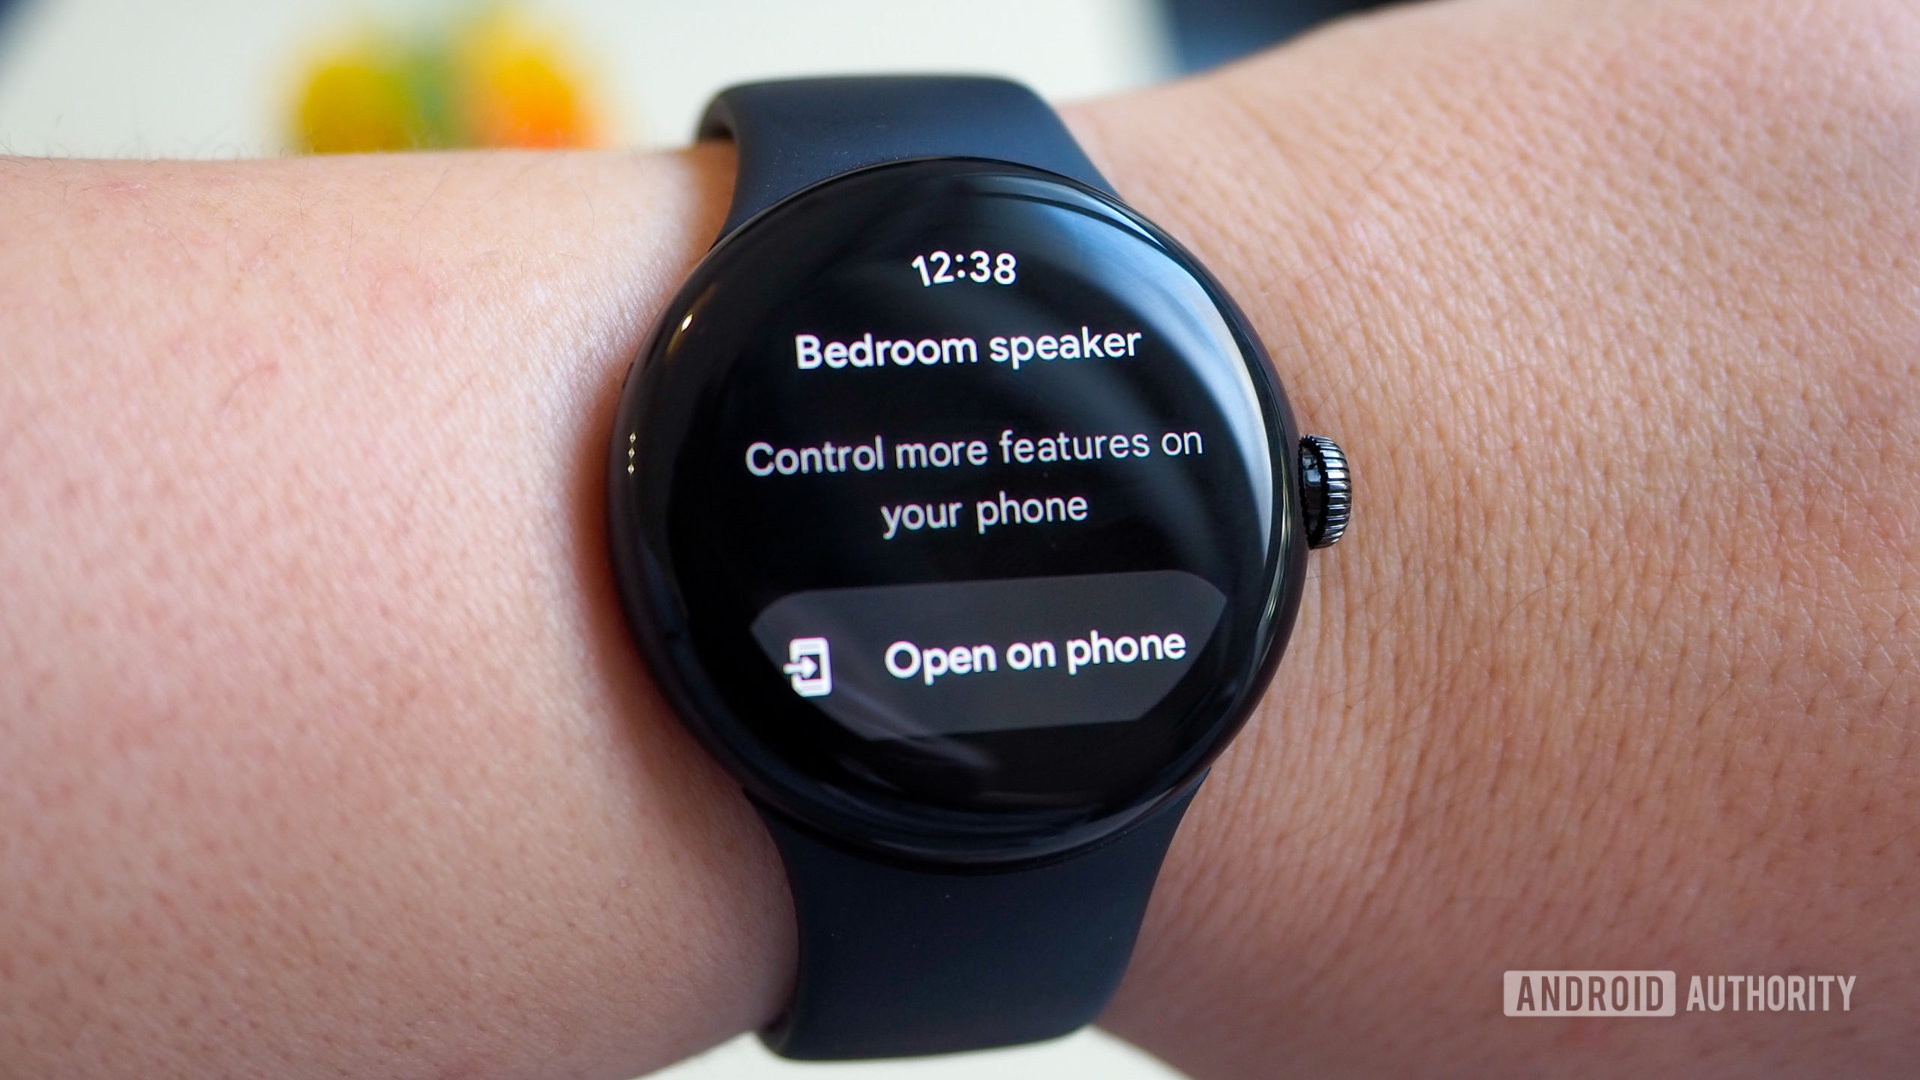 Google Home app on Pixel Watch showing app open notice on phone for more controls